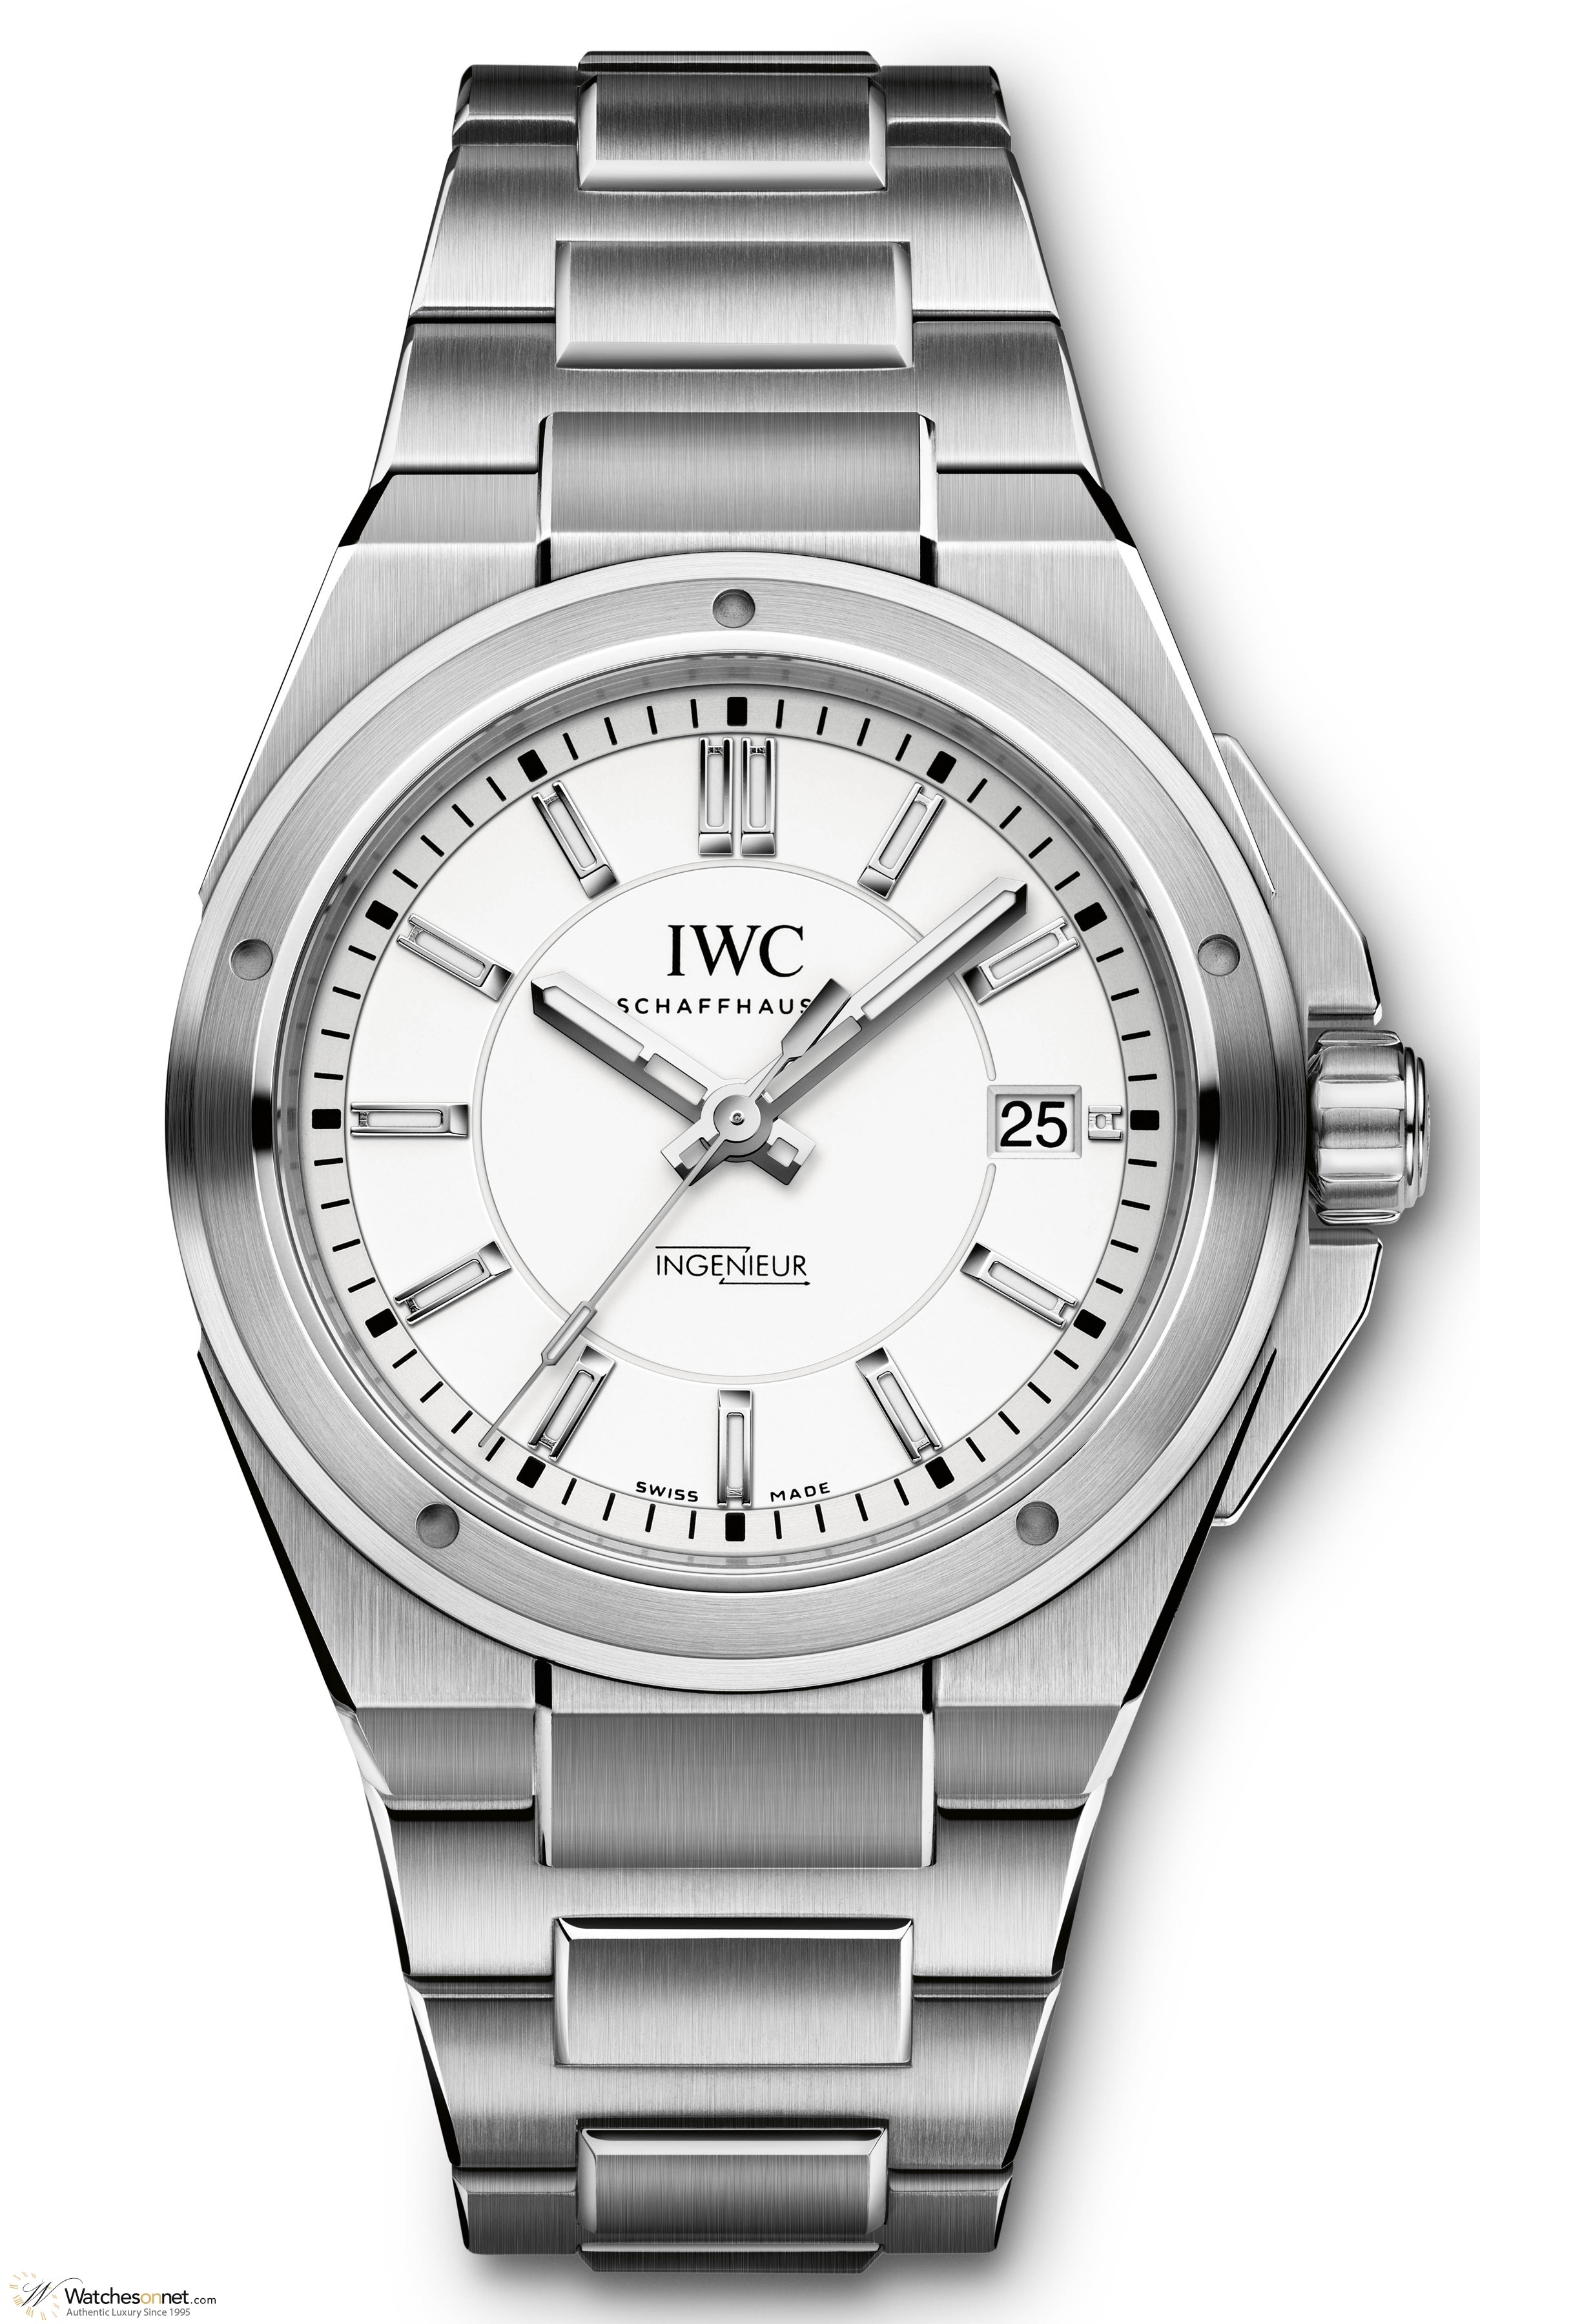 IWC Ingenieur IW323904 Men's Stainless Steel Automatic Watch